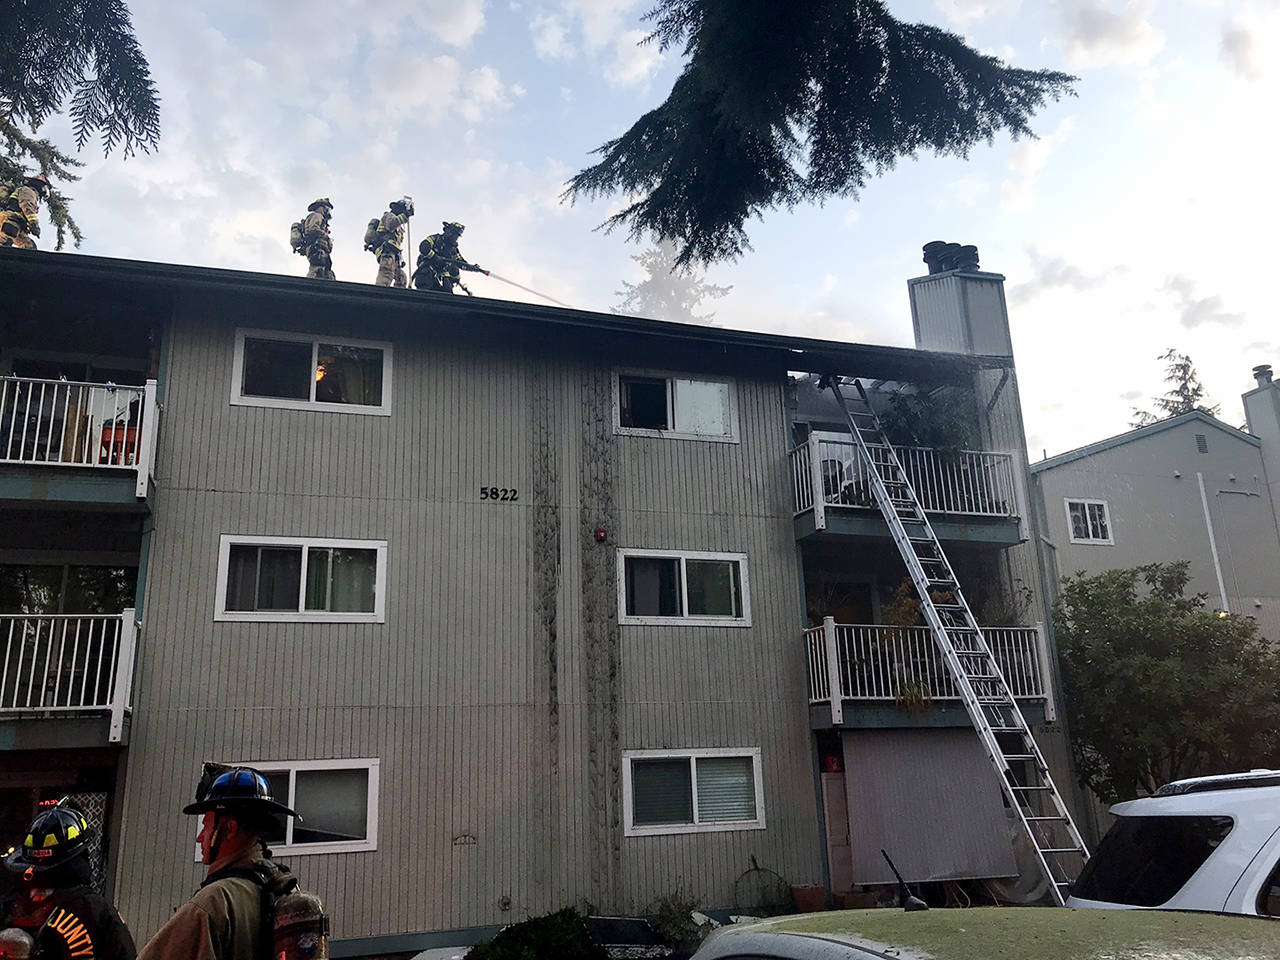 Crews spray water on the top floor of a condominium building in Lynnwood on Thursday. (South County Fire)